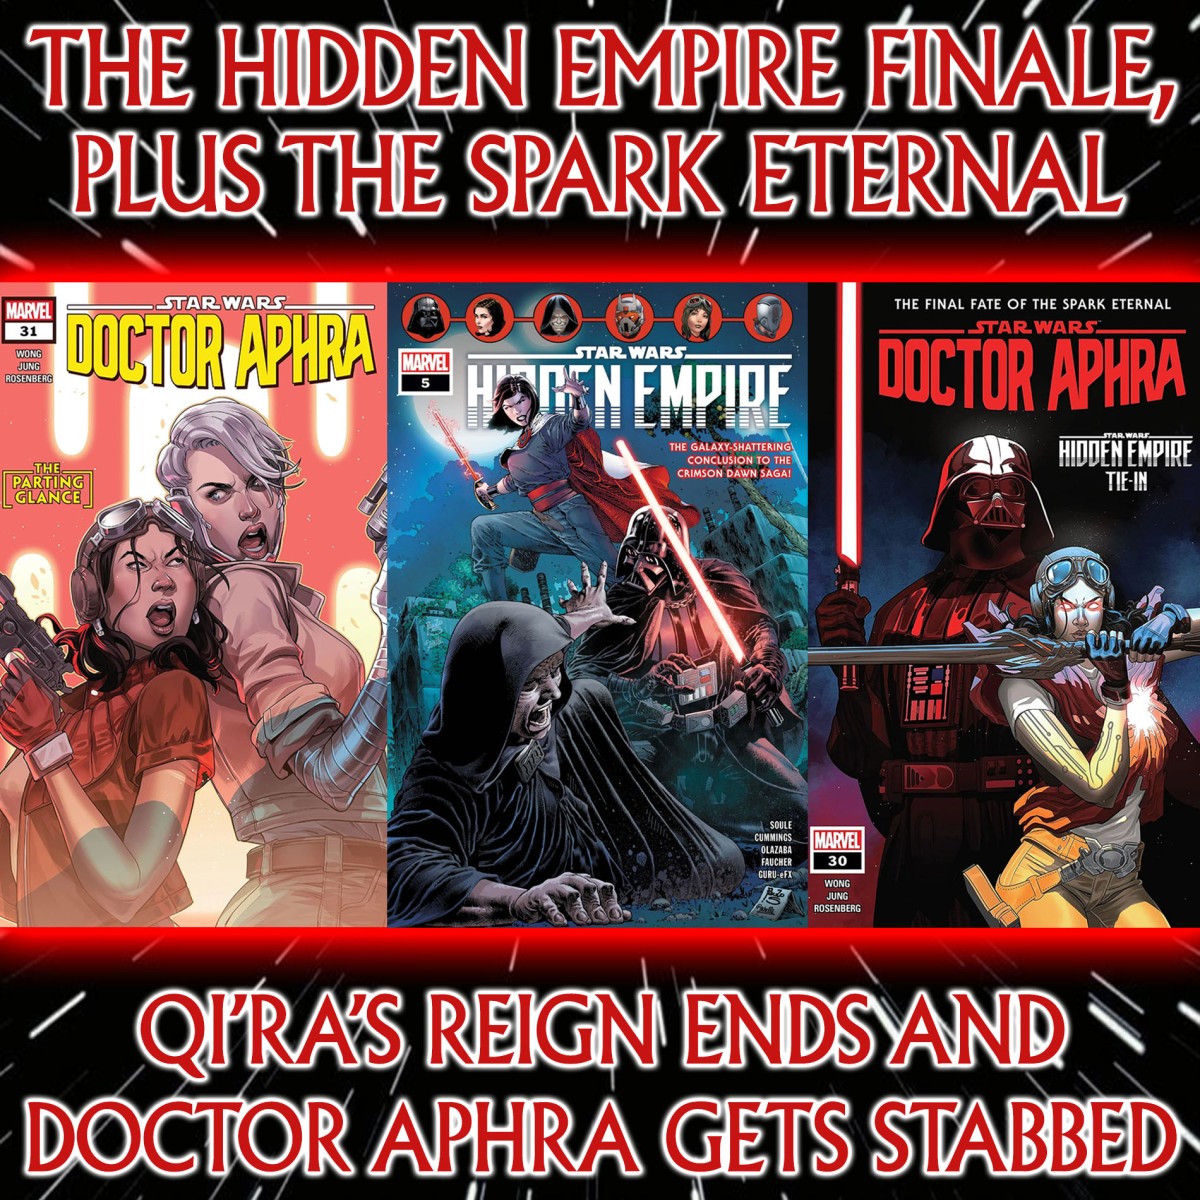 Star Wars: Comics In Canon – Hidden Empire Finale & The Spark Eternal: Qi’ra’s Reign Ends & Aphra Gets Stabbed (HE5 & Doctor Aphra 30 & 31) – Ep 129